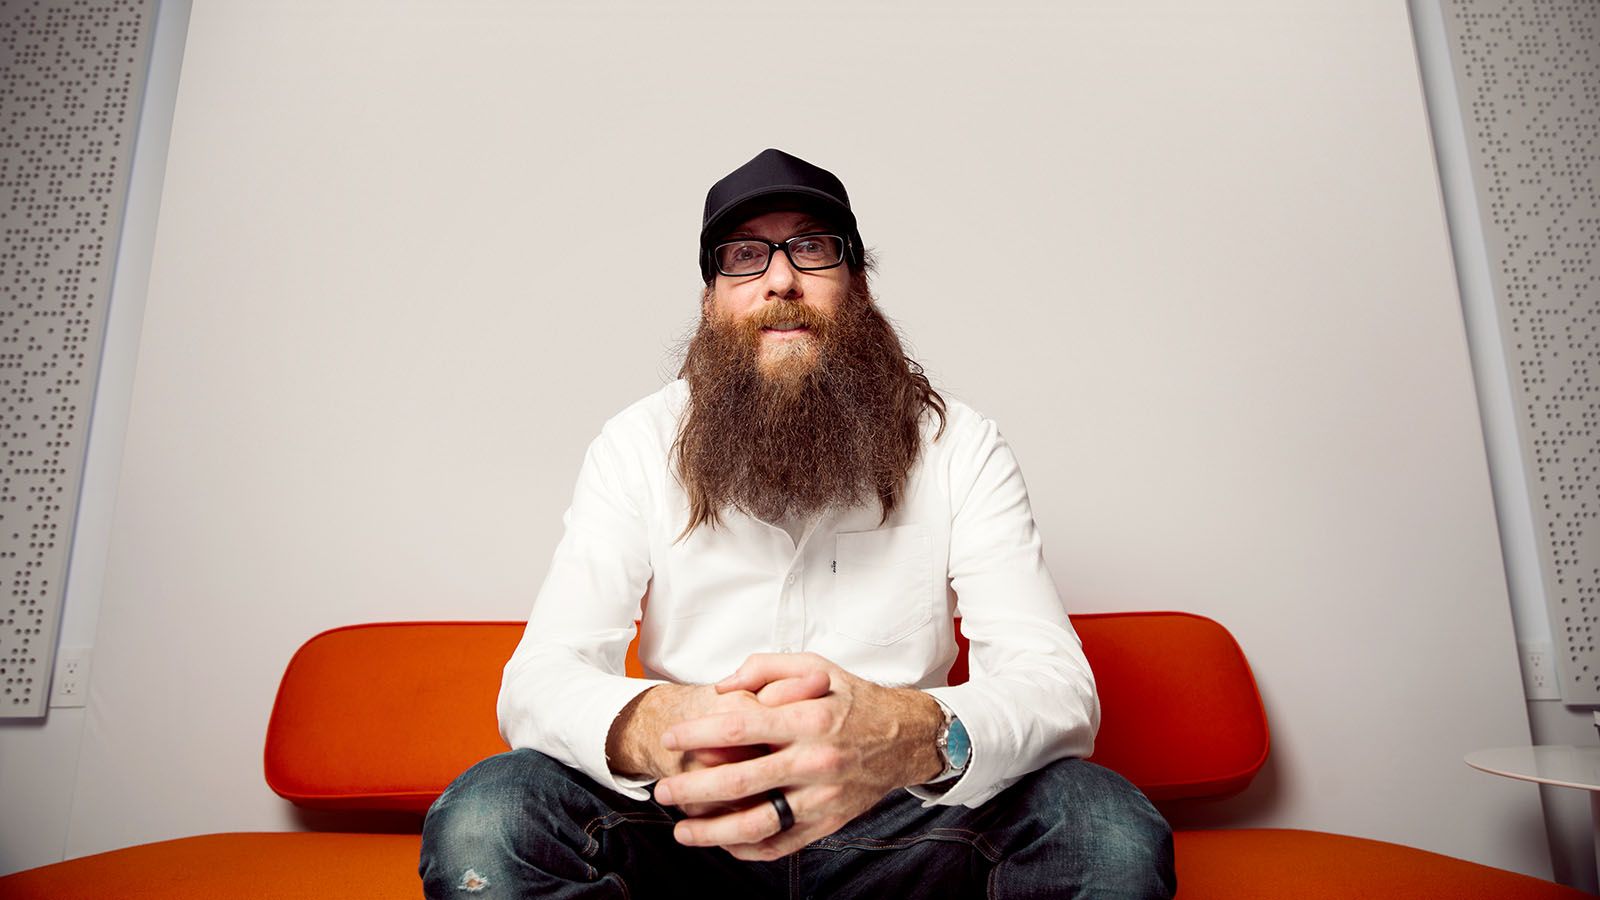 Fans will be lining up early to get a good spot to see Crowder at Winter Jam on Feb. 15 at Memorial Coliseum.